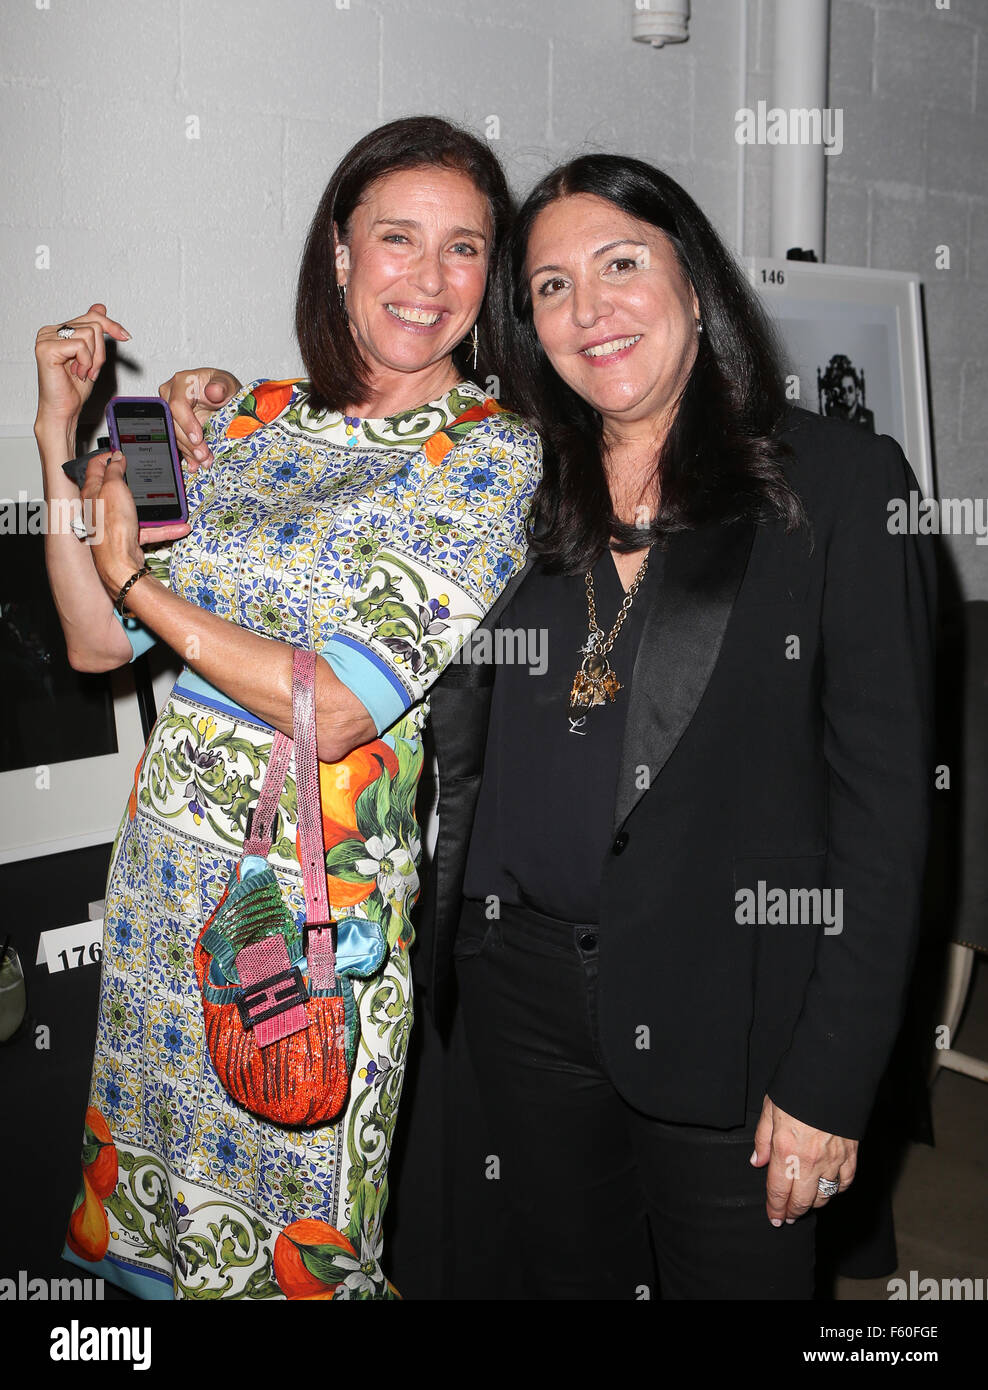 CHAIRS FOR CHARITY  Benefiting Homeless Youth Services At The Los Angeles LGBT Center Inside  Featuring: Mimi Rogers, Kathy Kloves Where: Culver City, California, United States When: 24 Sep 2015 Stock Photo